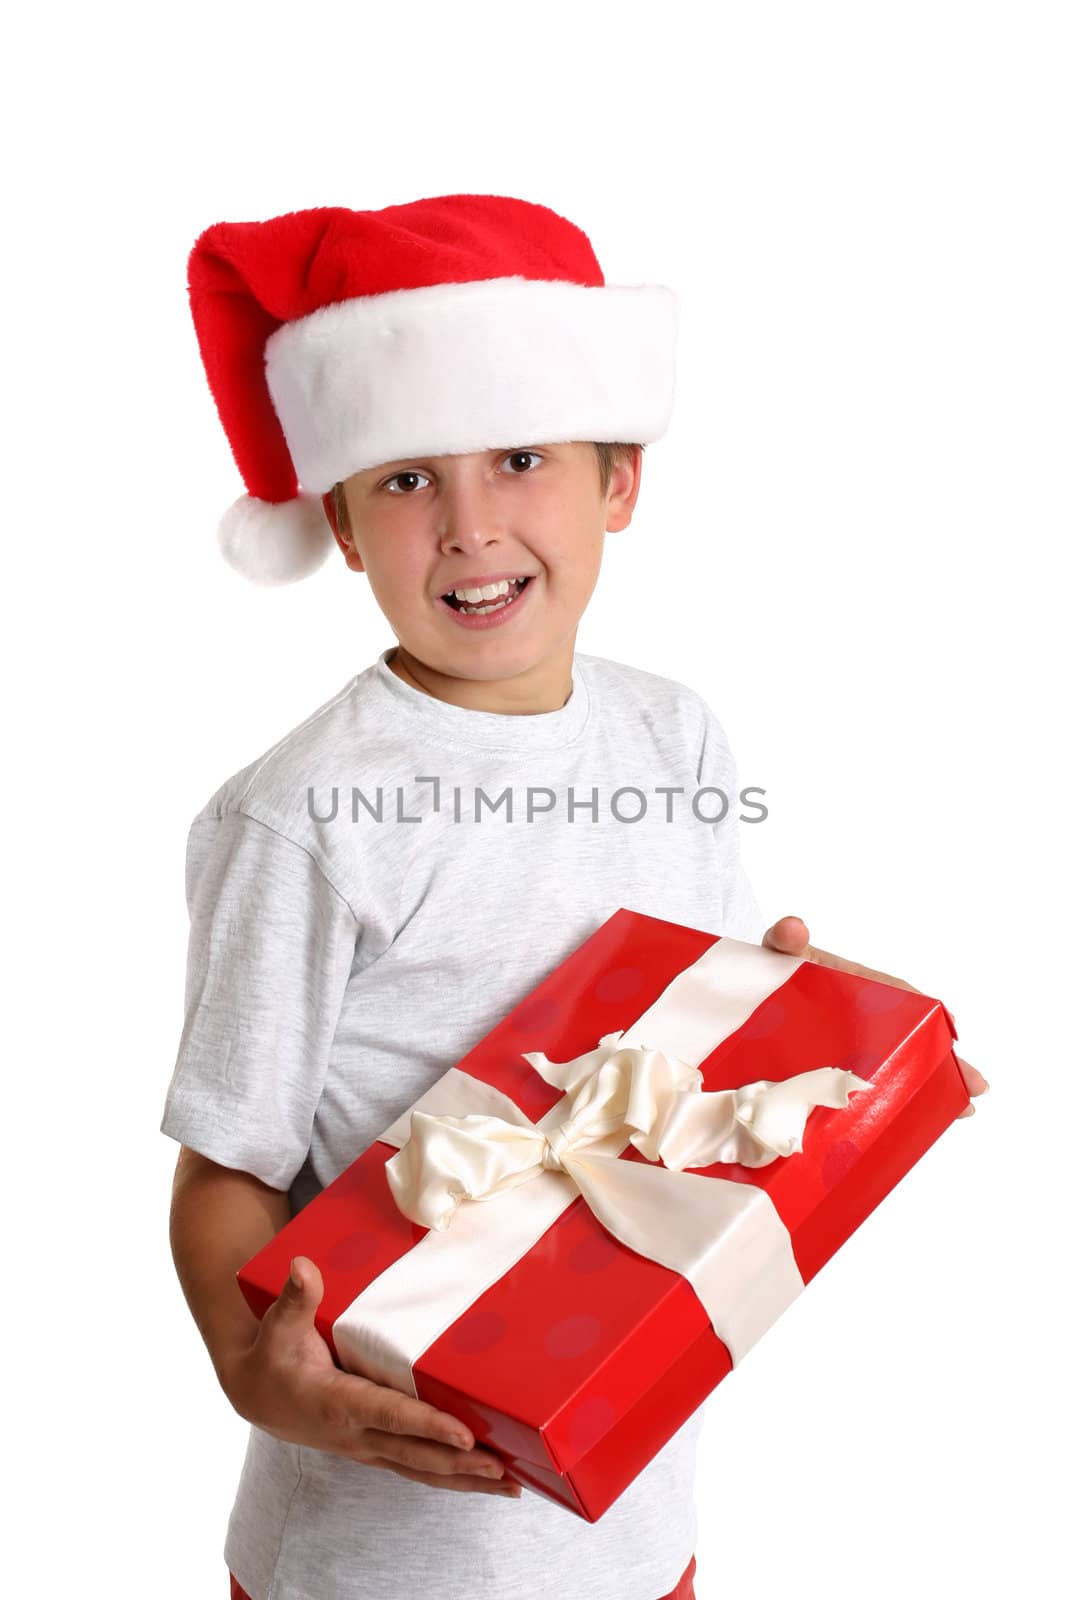 A happy you8ng child holding a gift tied with ribbon.  White background.